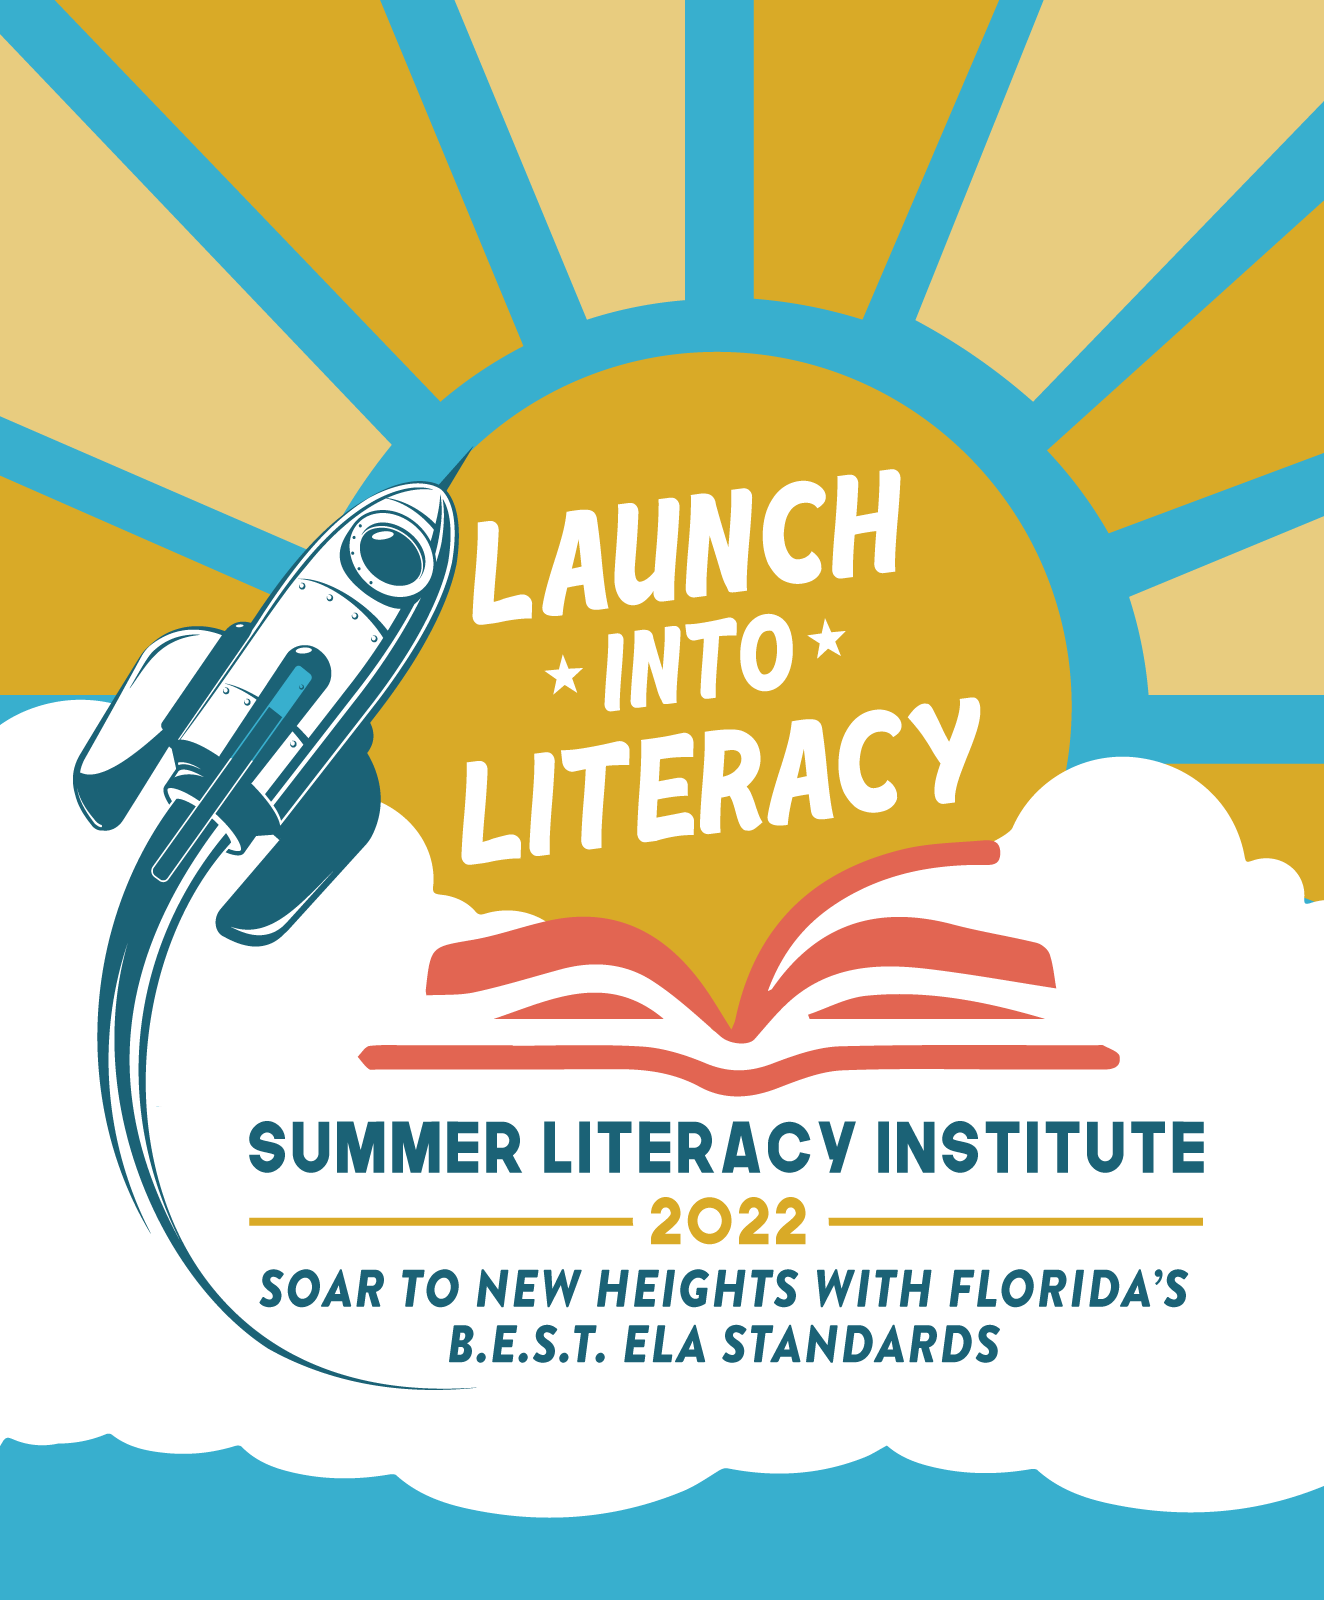 Launch into Literacy Summer Literacy Institute 2022